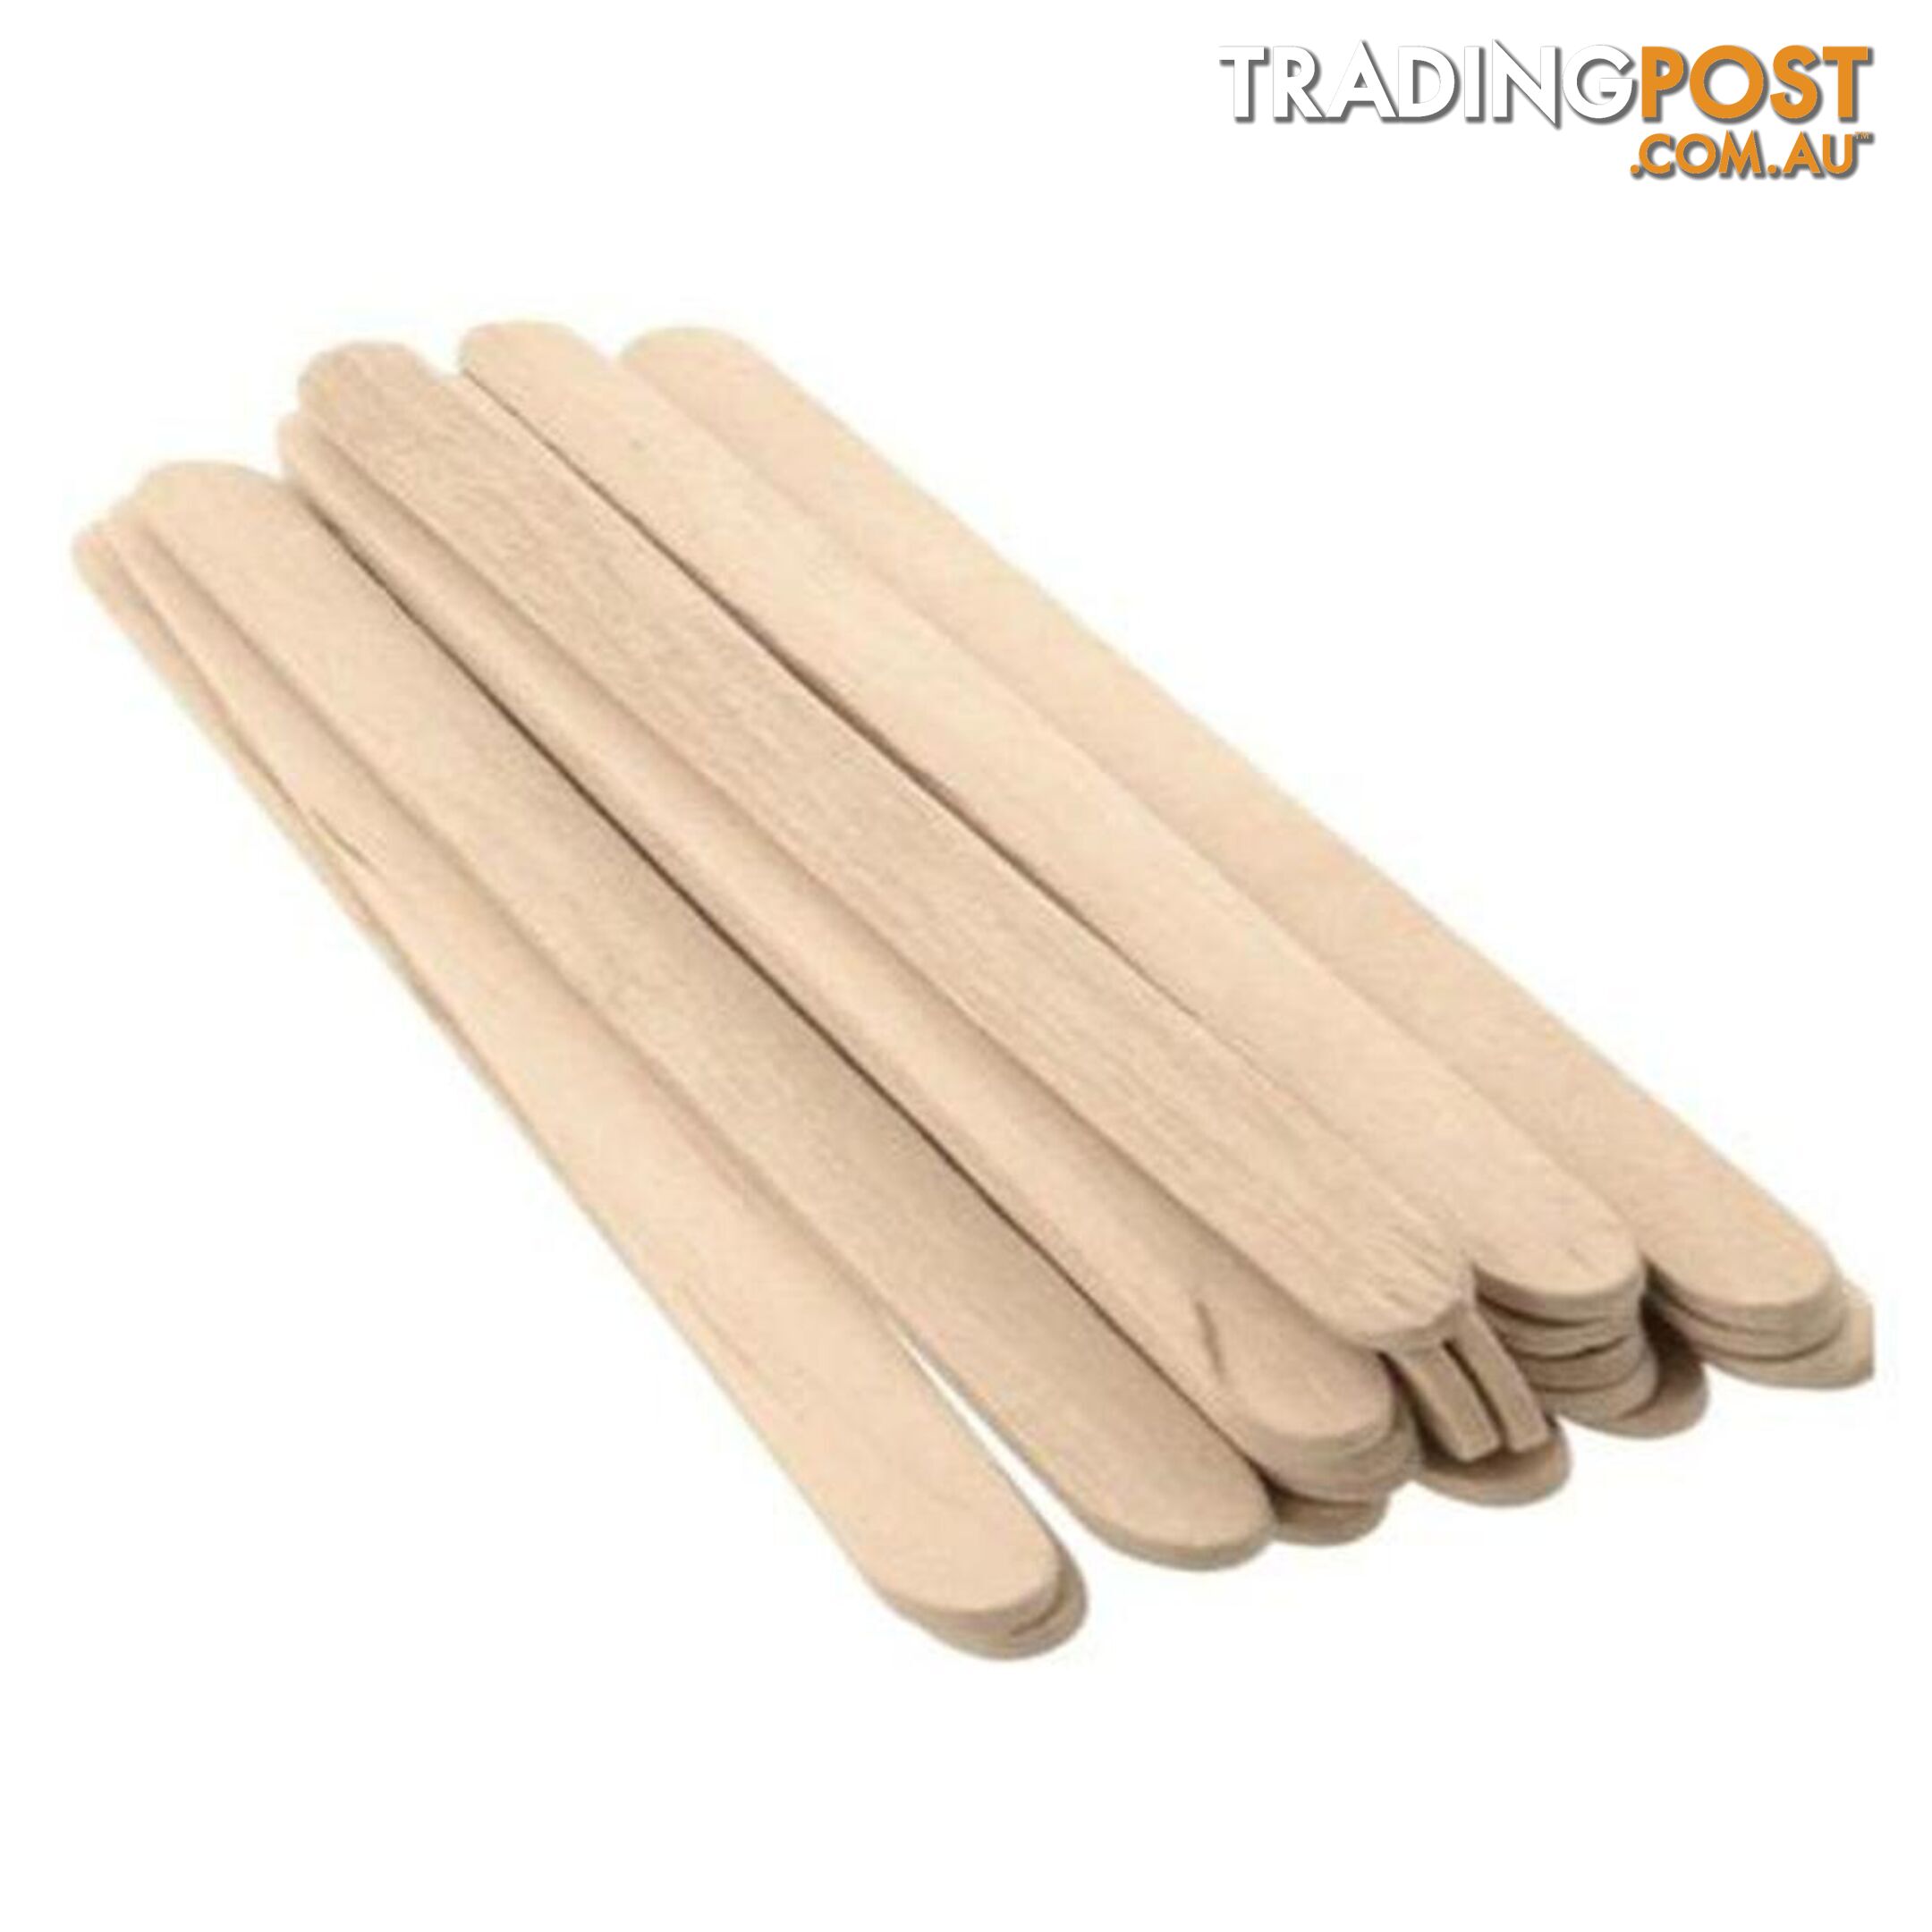 10x Popsicle Stick Wooden Stirrer Waxing Spatula - Unbranded - 9476062098490